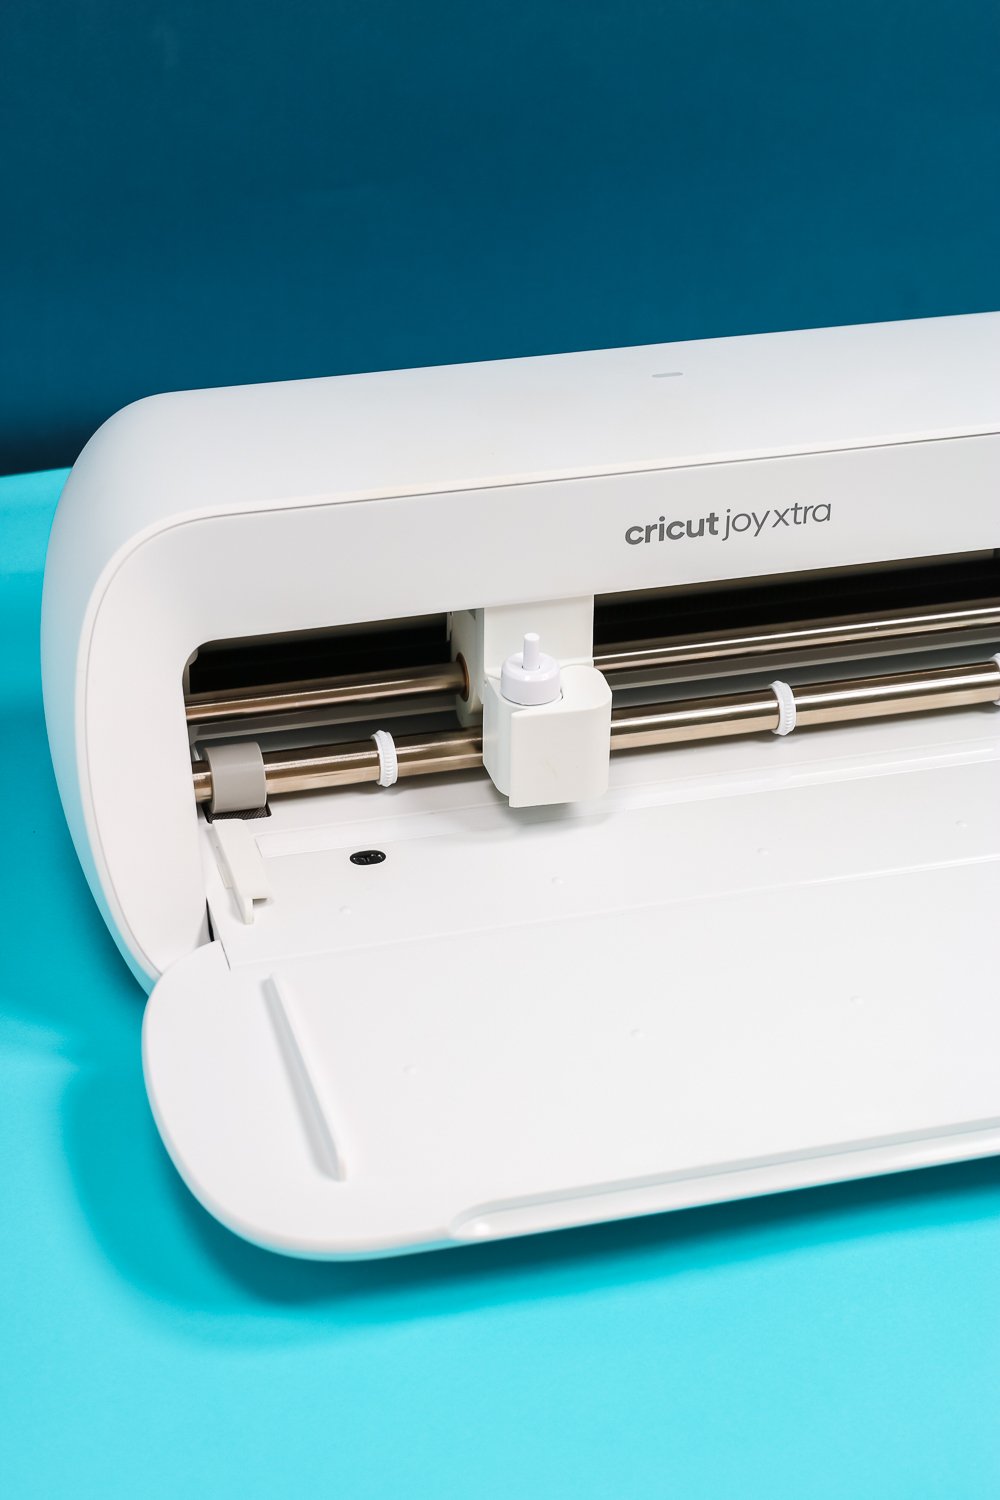 How to use the Print & Cut Feature on your Cricut - Happily Ever After, Etc.